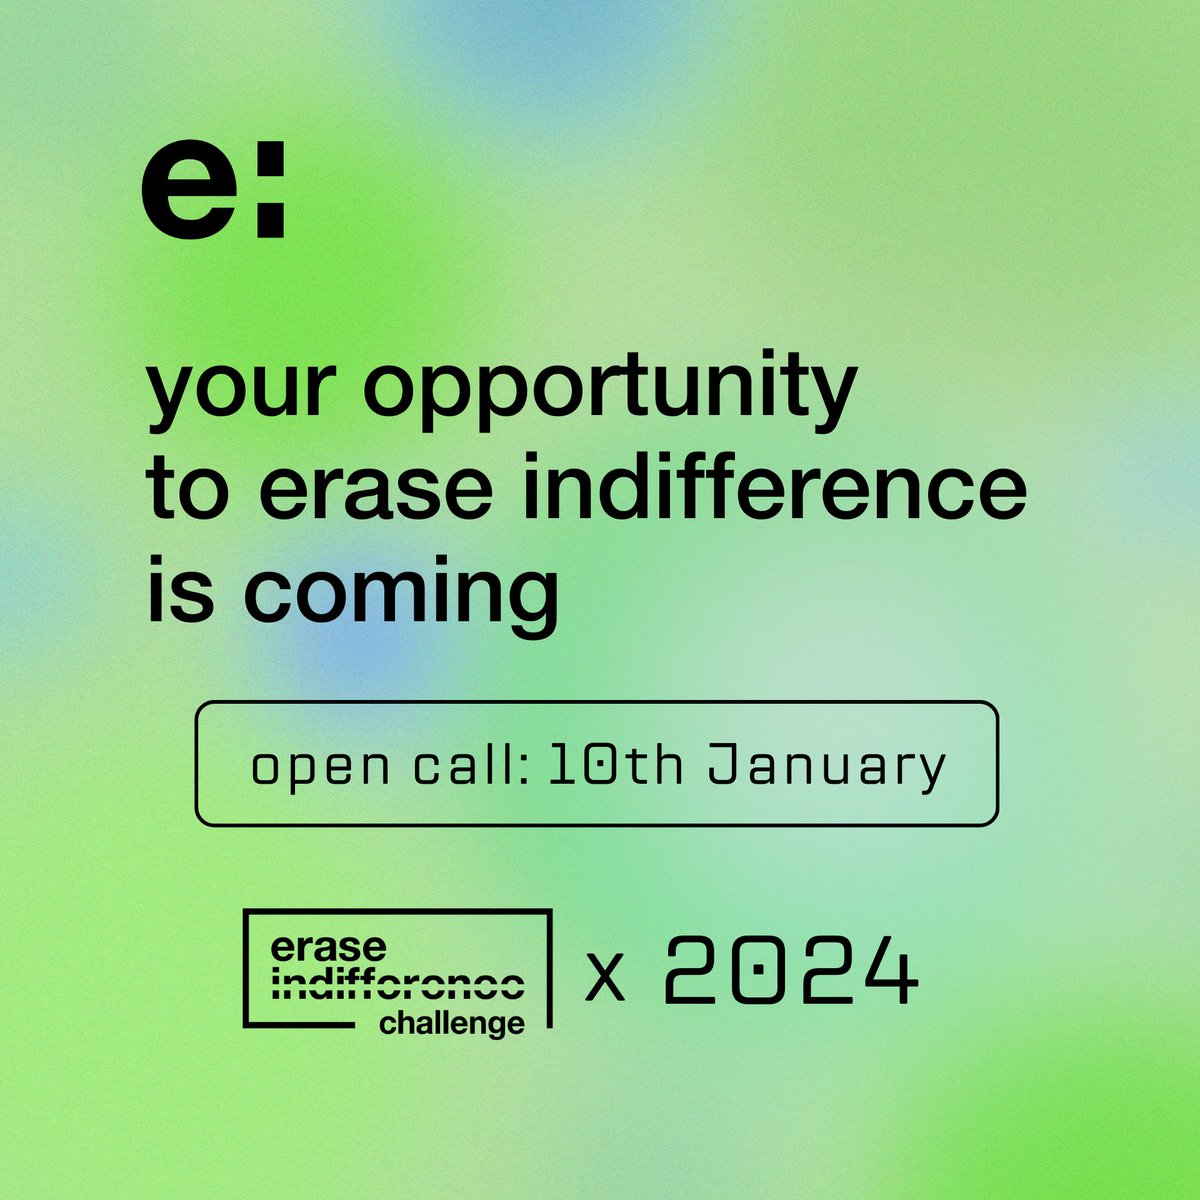 Erase Indifference Challenge call for submissions. Open call from 10th January.